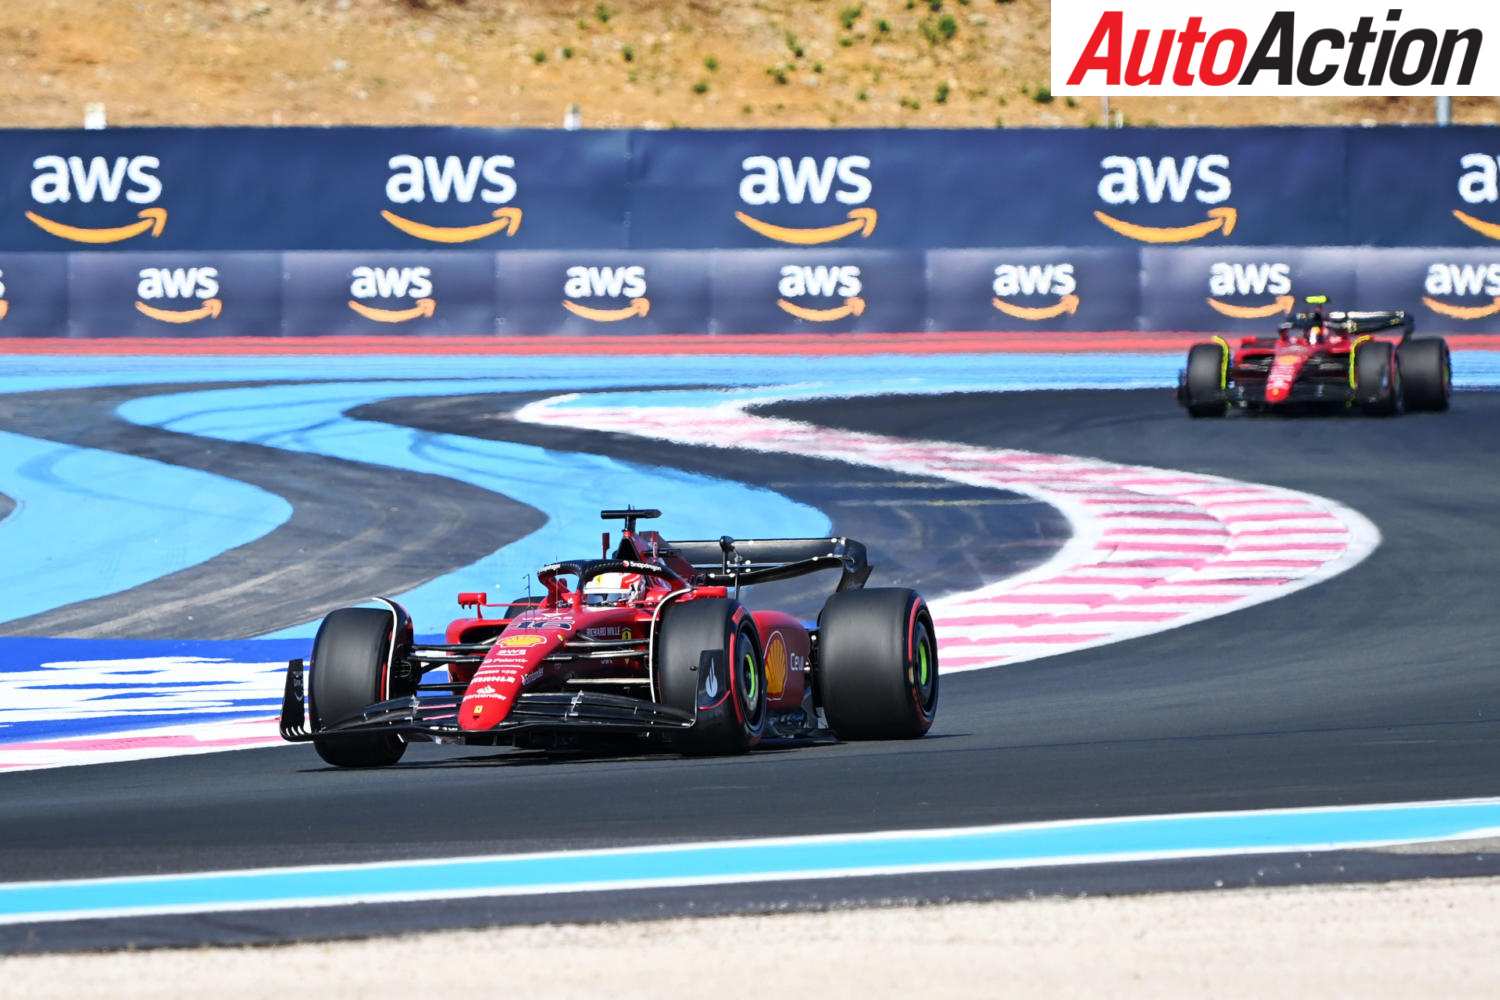 LECLERC SLINGS INTO POLE POSITION FOR FRENCH GP - Auto Action